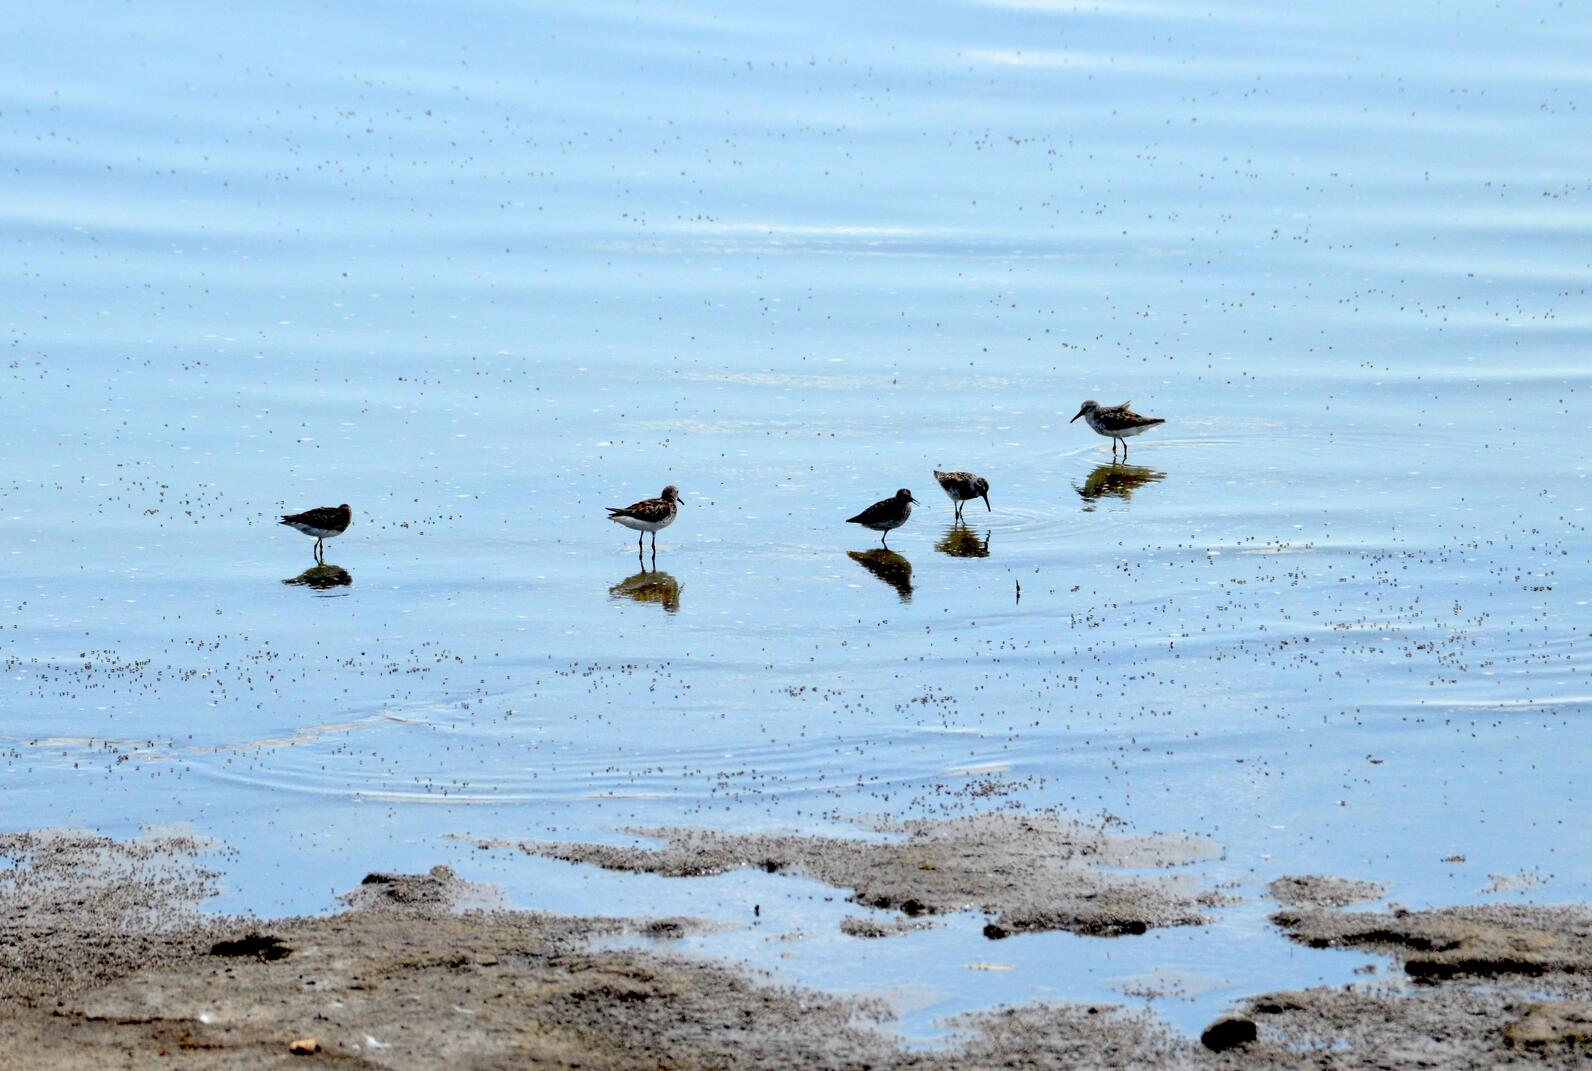 A group of Western sandpipers hanging out in the water near the shore of the Salton Sea